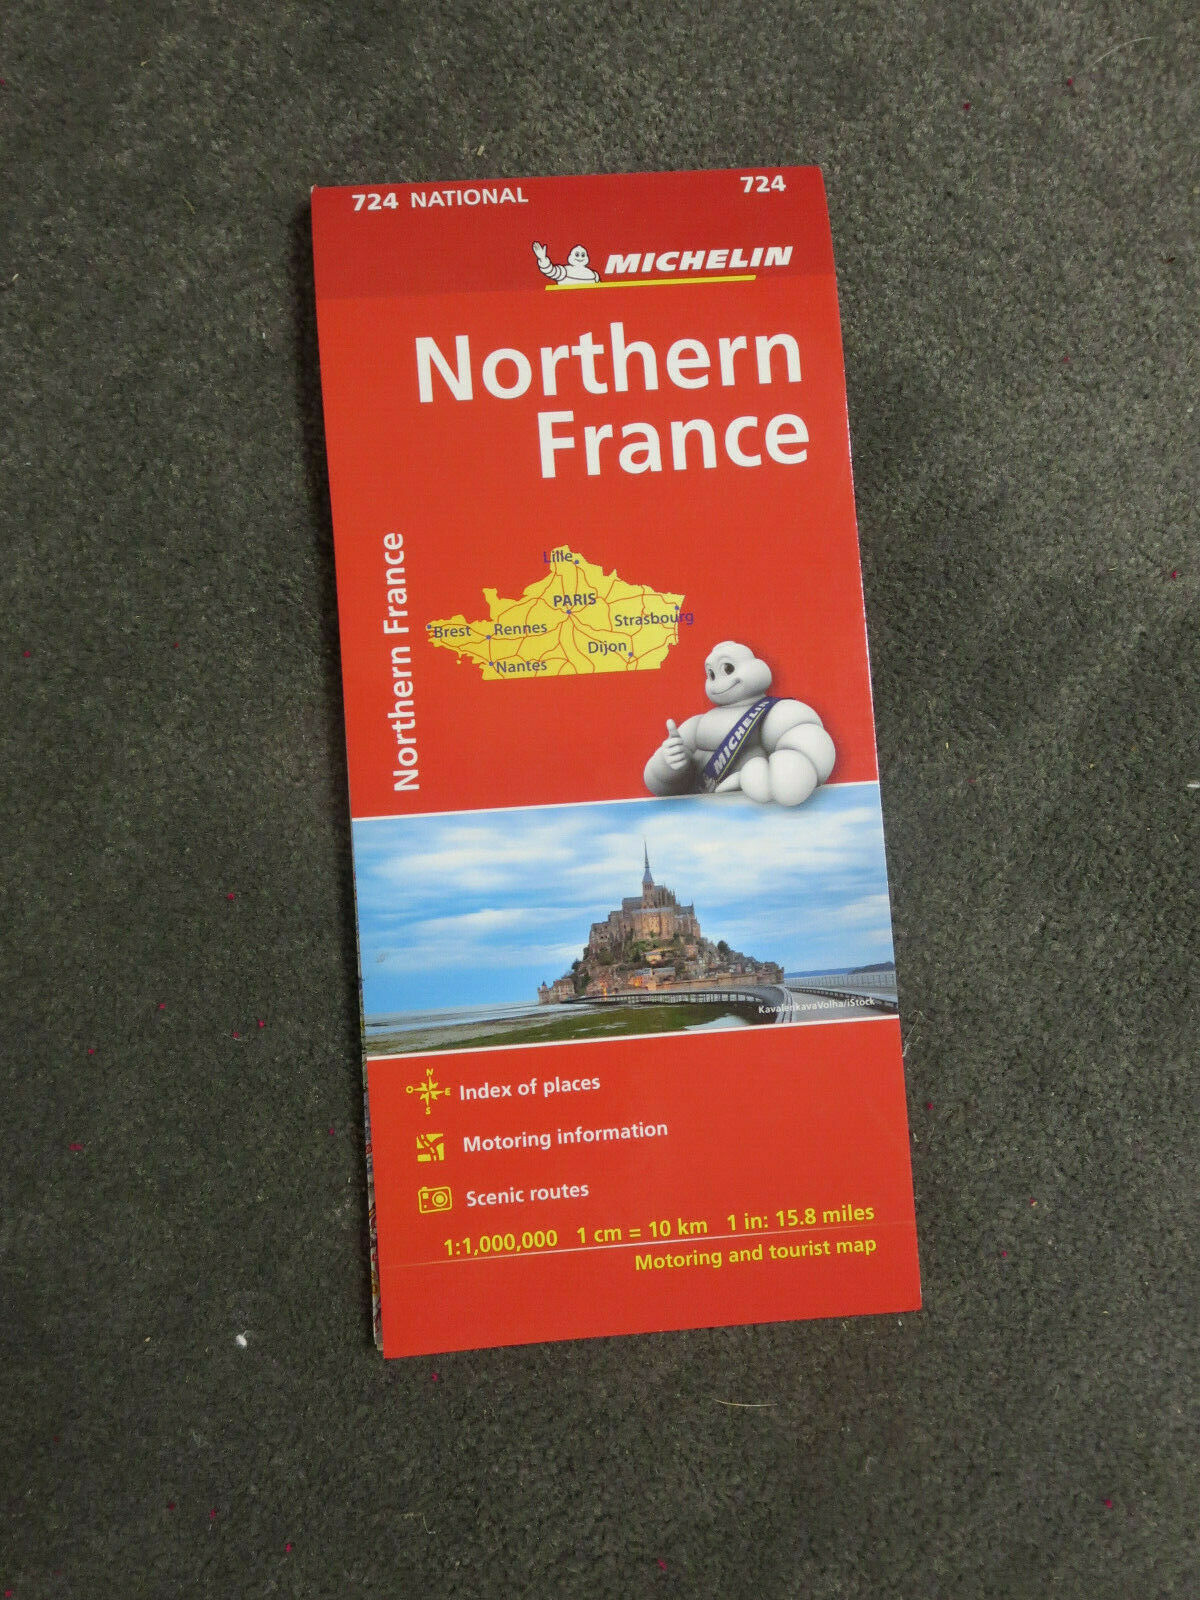 Michelin Map Of Northern France, Michelin Map # 724